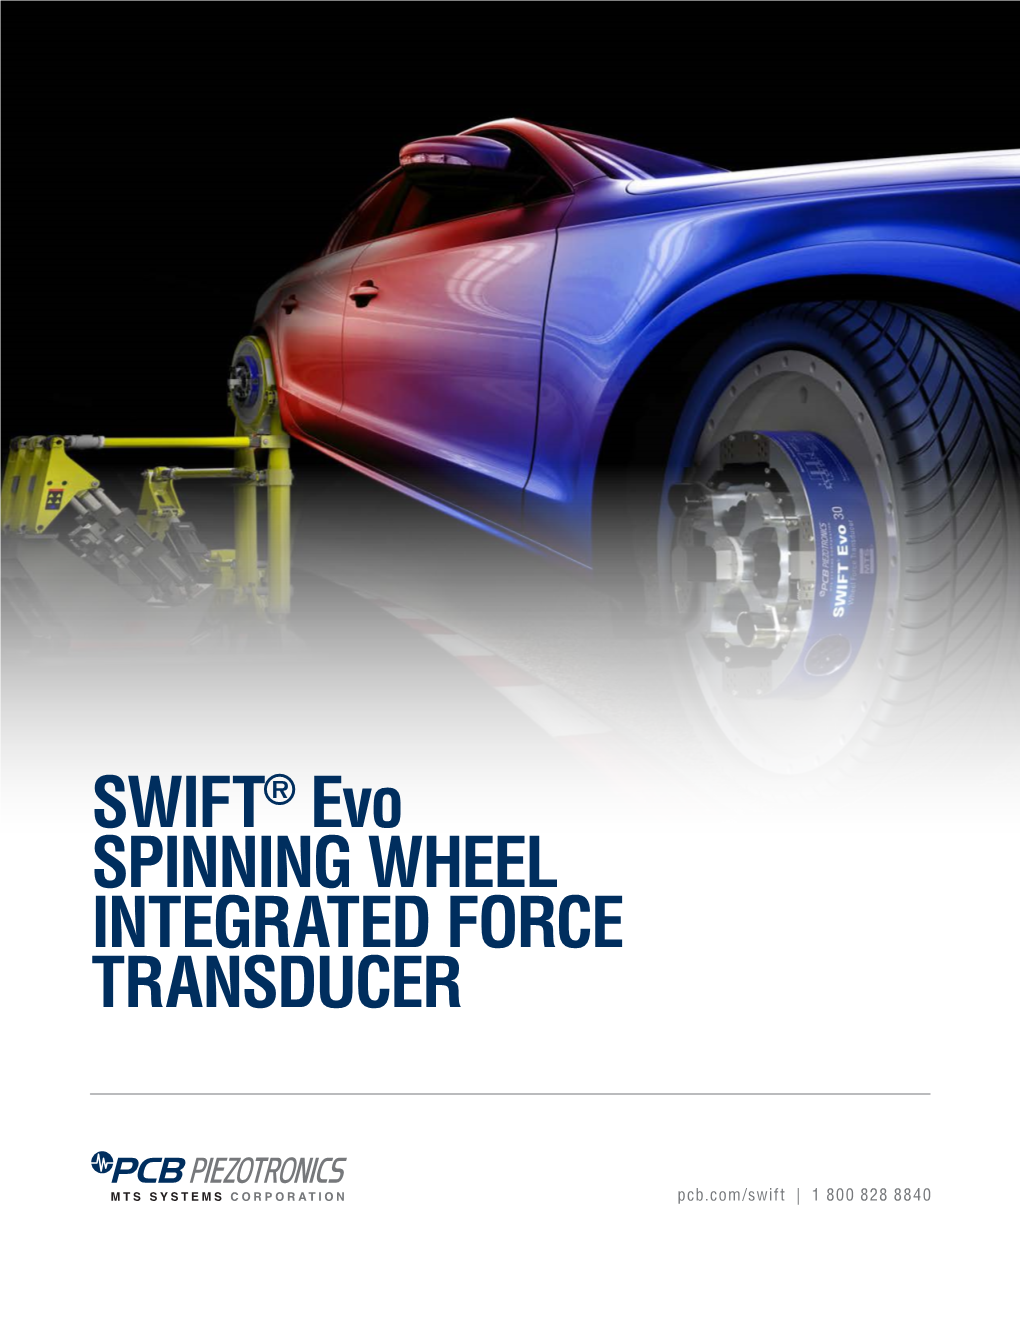 SWIFT® Evo SPINNING WHEEL INTEGRATED FORCE TRANSDUCER